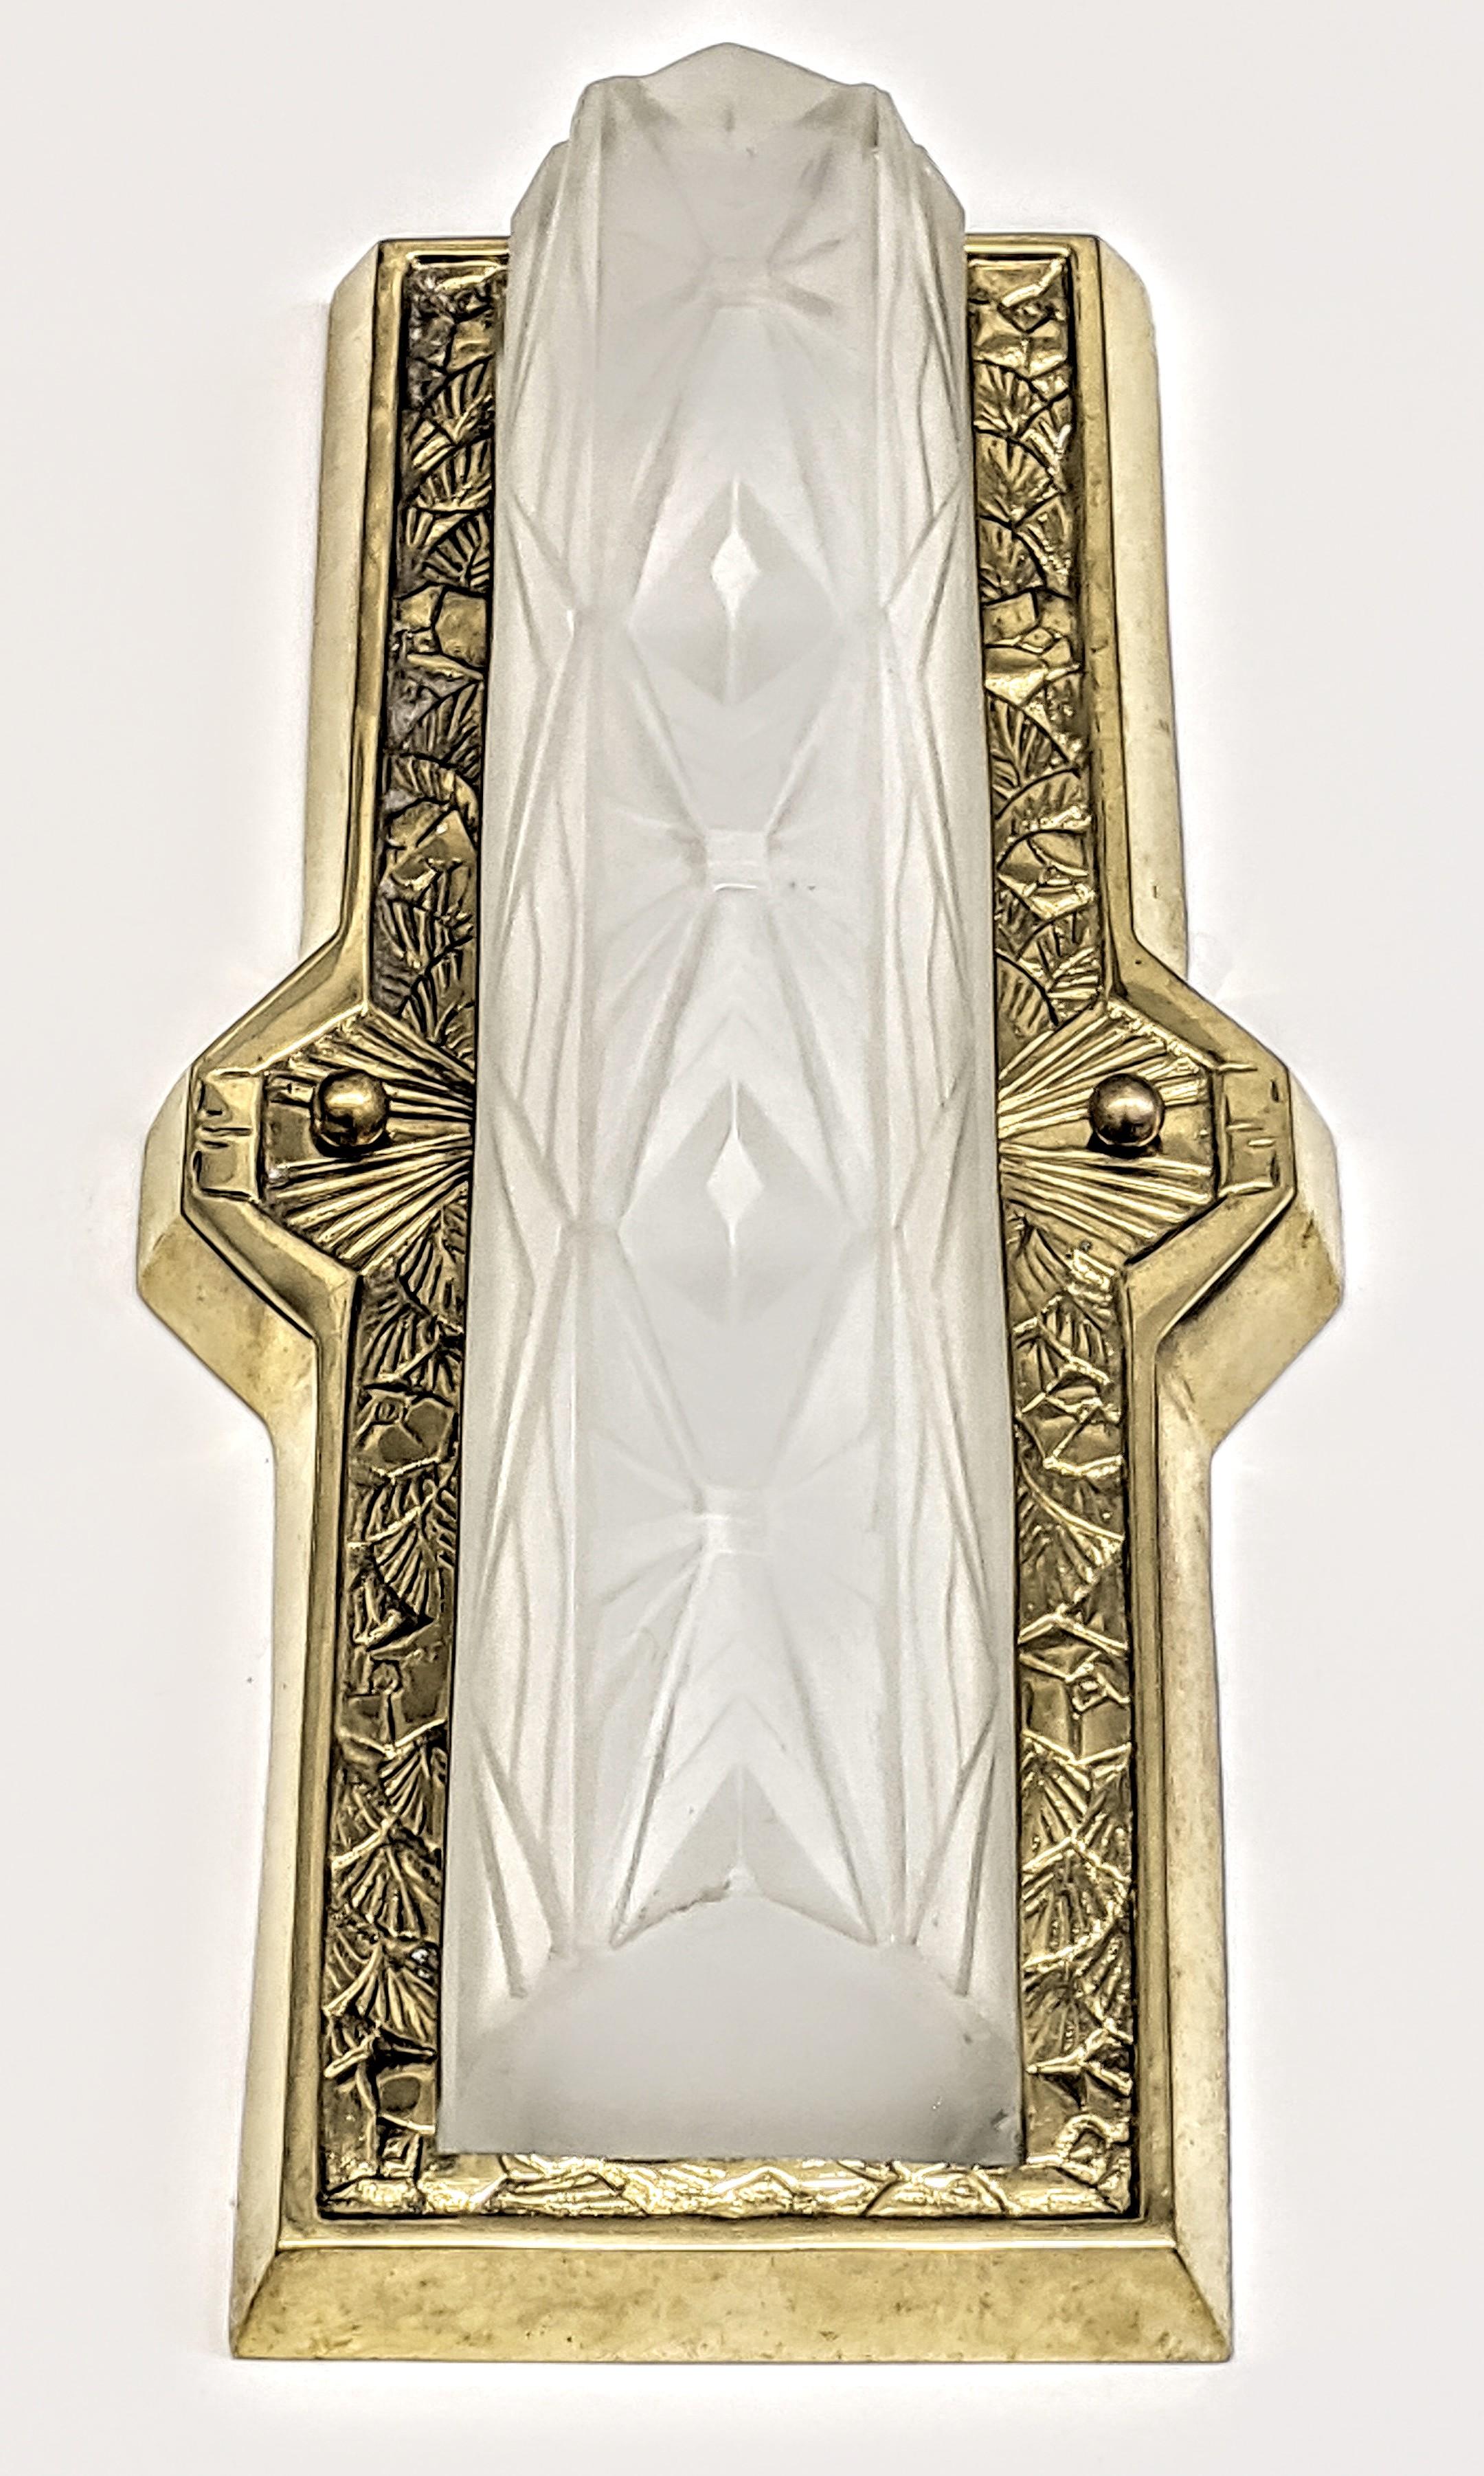 A pair of French Art Deco wall sconces created by the French artist 